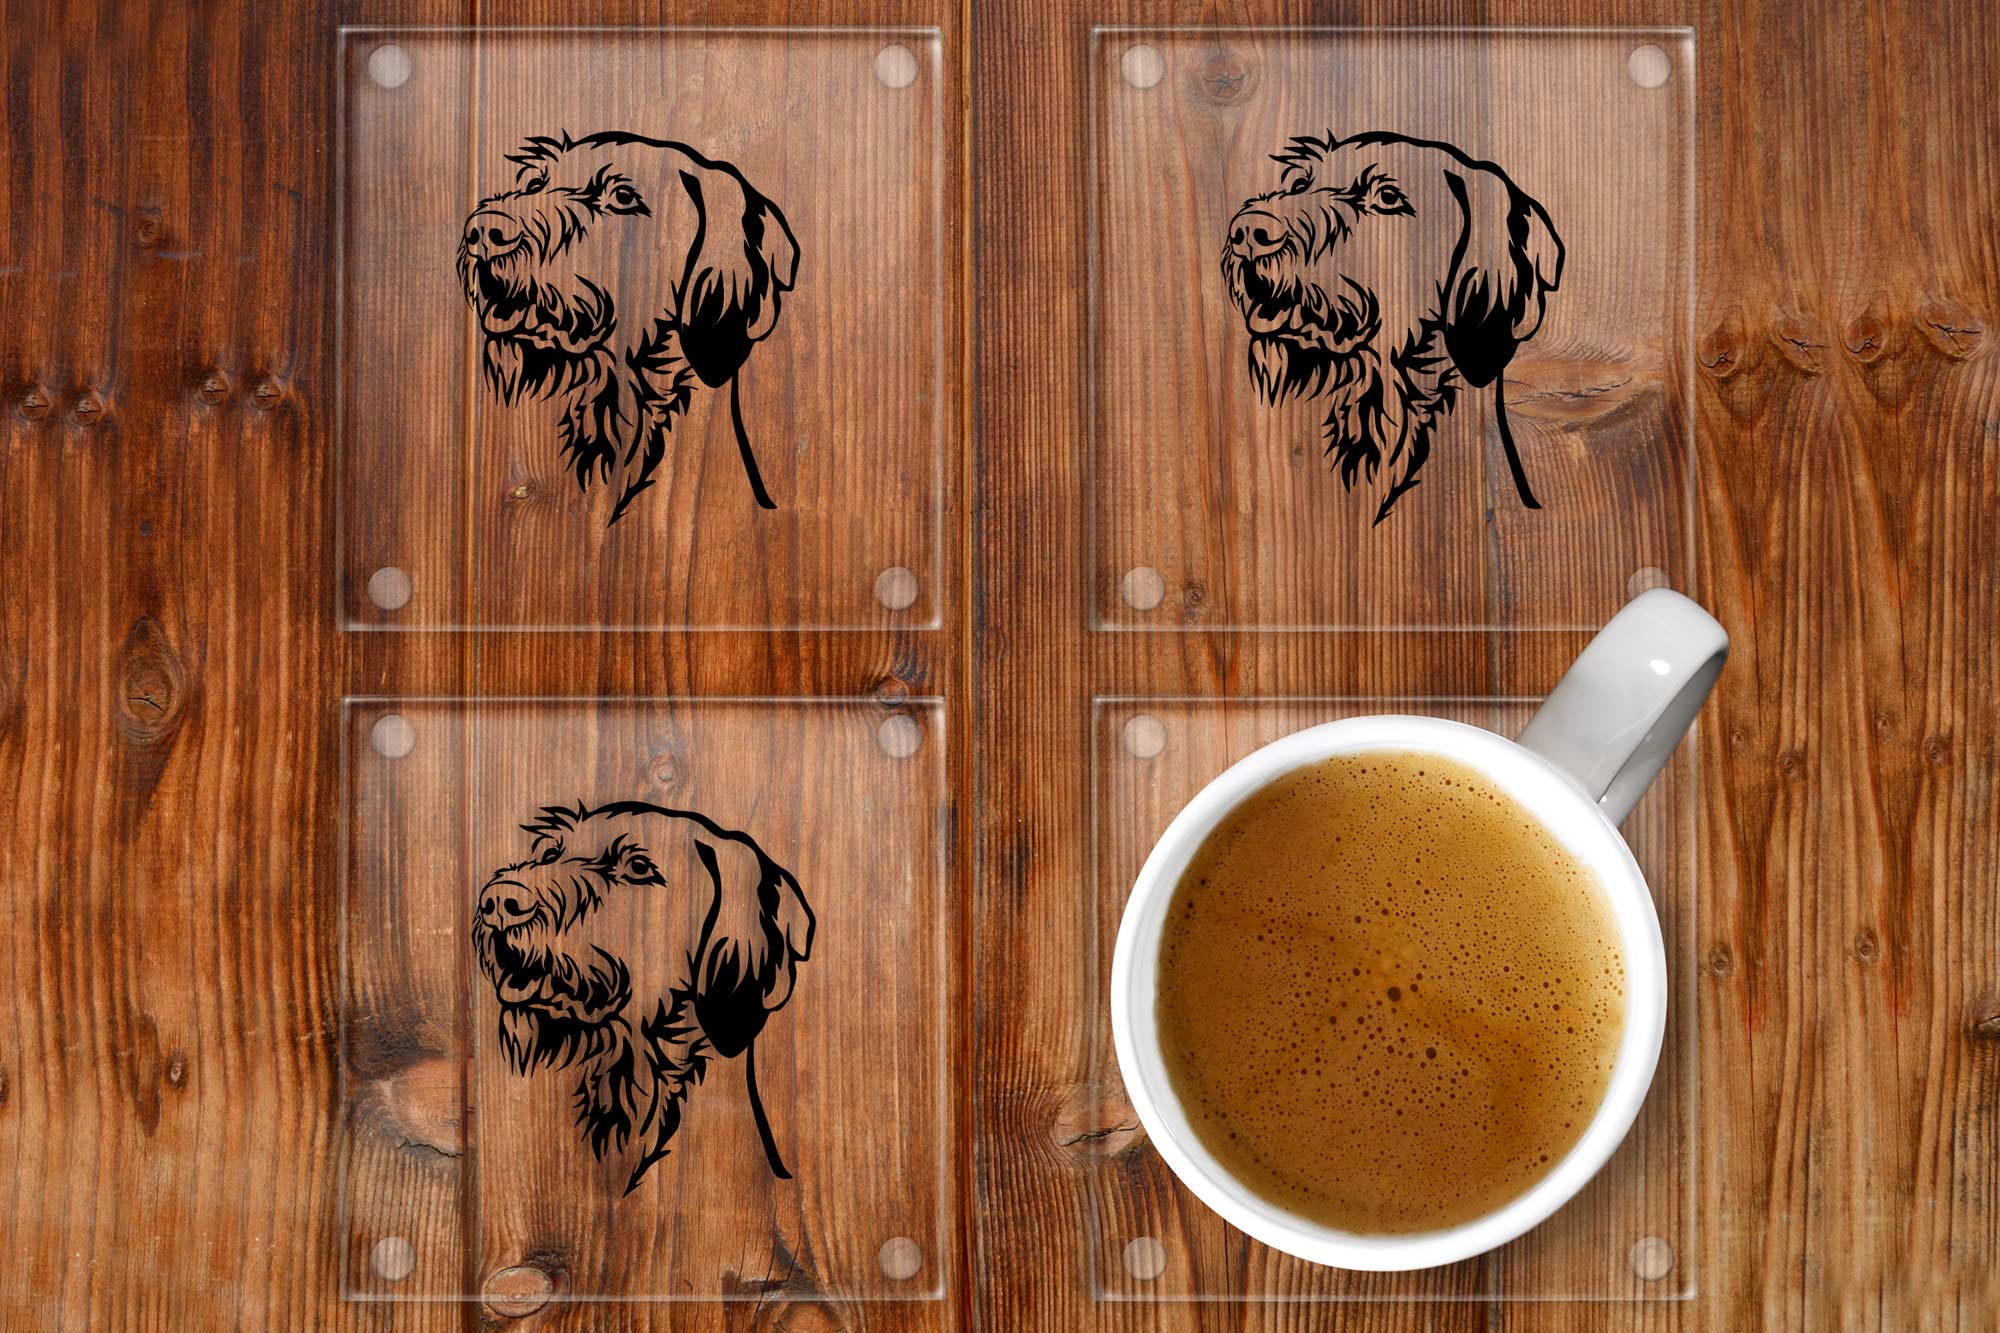 Hungarian Wirehaired Vizsla glass coasters